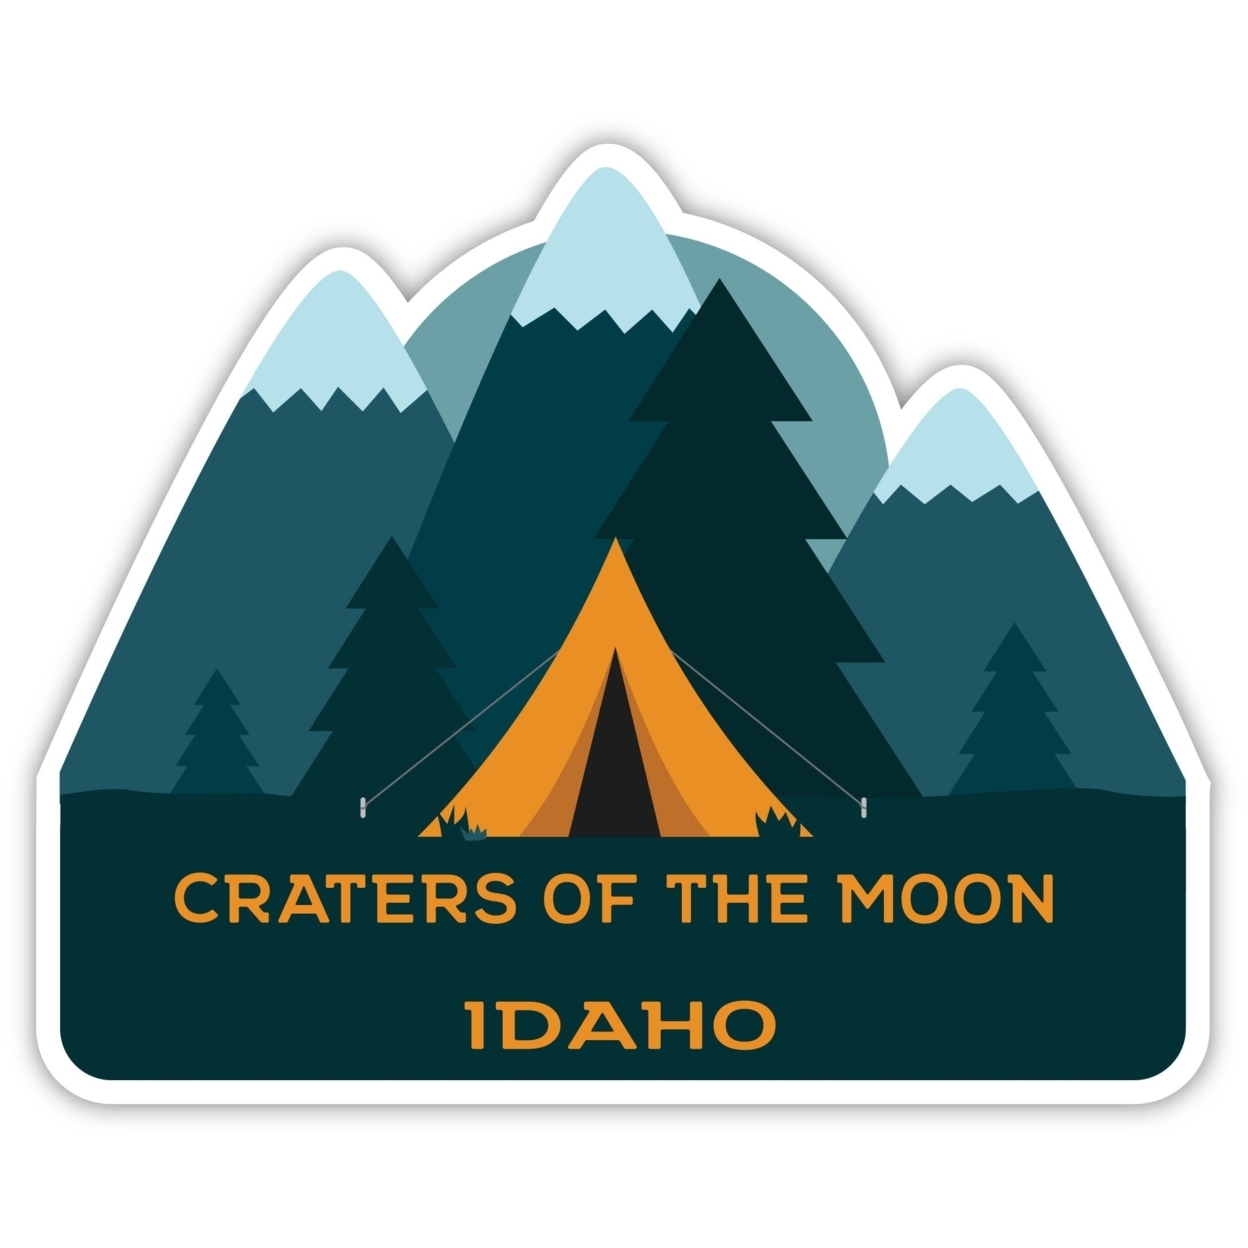 Craters Of The Moon Idaho Souvenir Decorative Stickers (Choose Theme And Size) - 4-Pack, 12-Inch, Bear